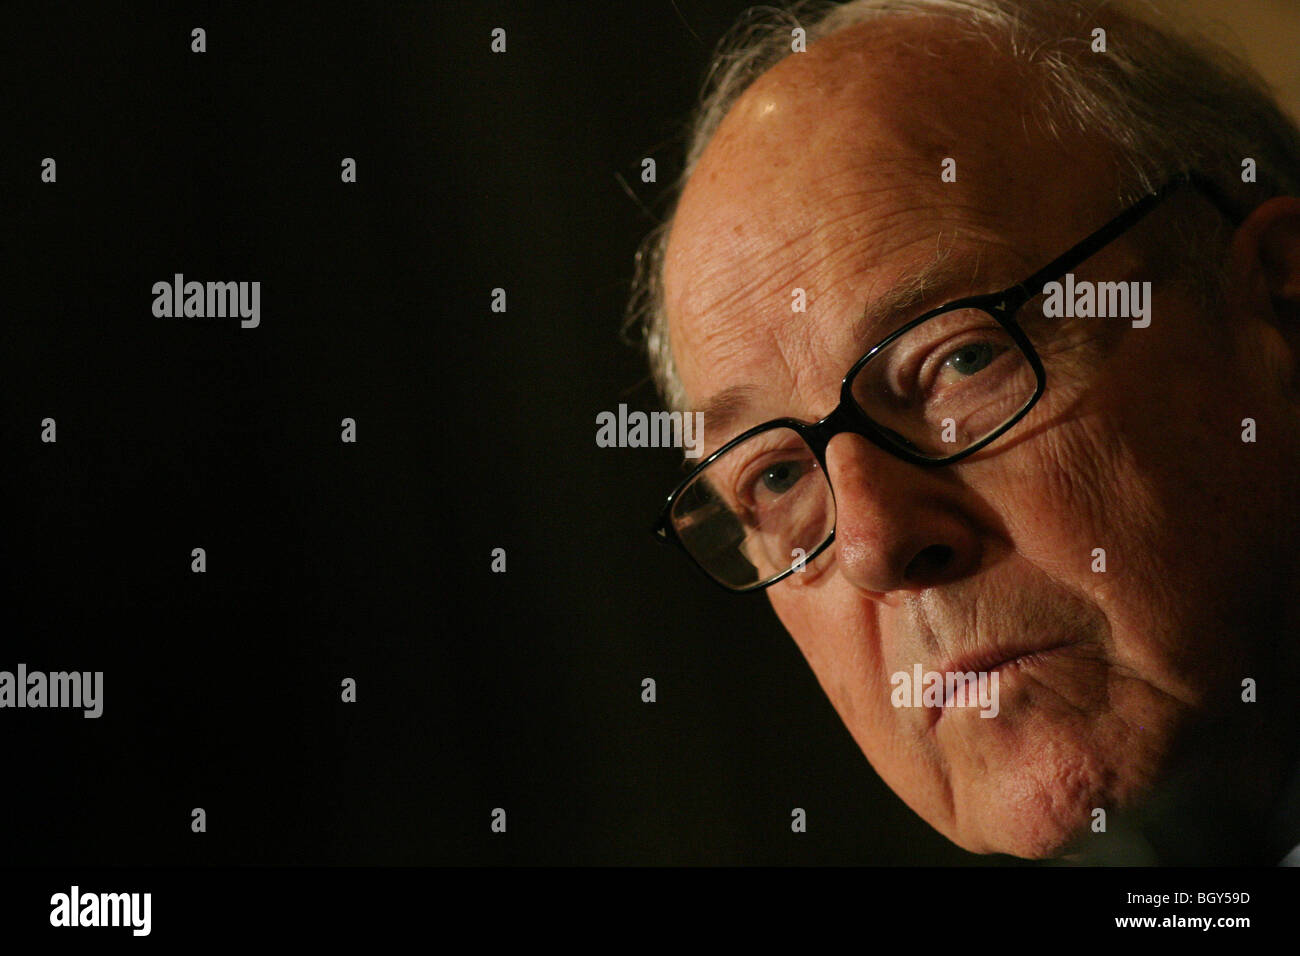 Dr. Hans Blix, Chairman of the Weapons of Mass Destruction Commission Stock Photo